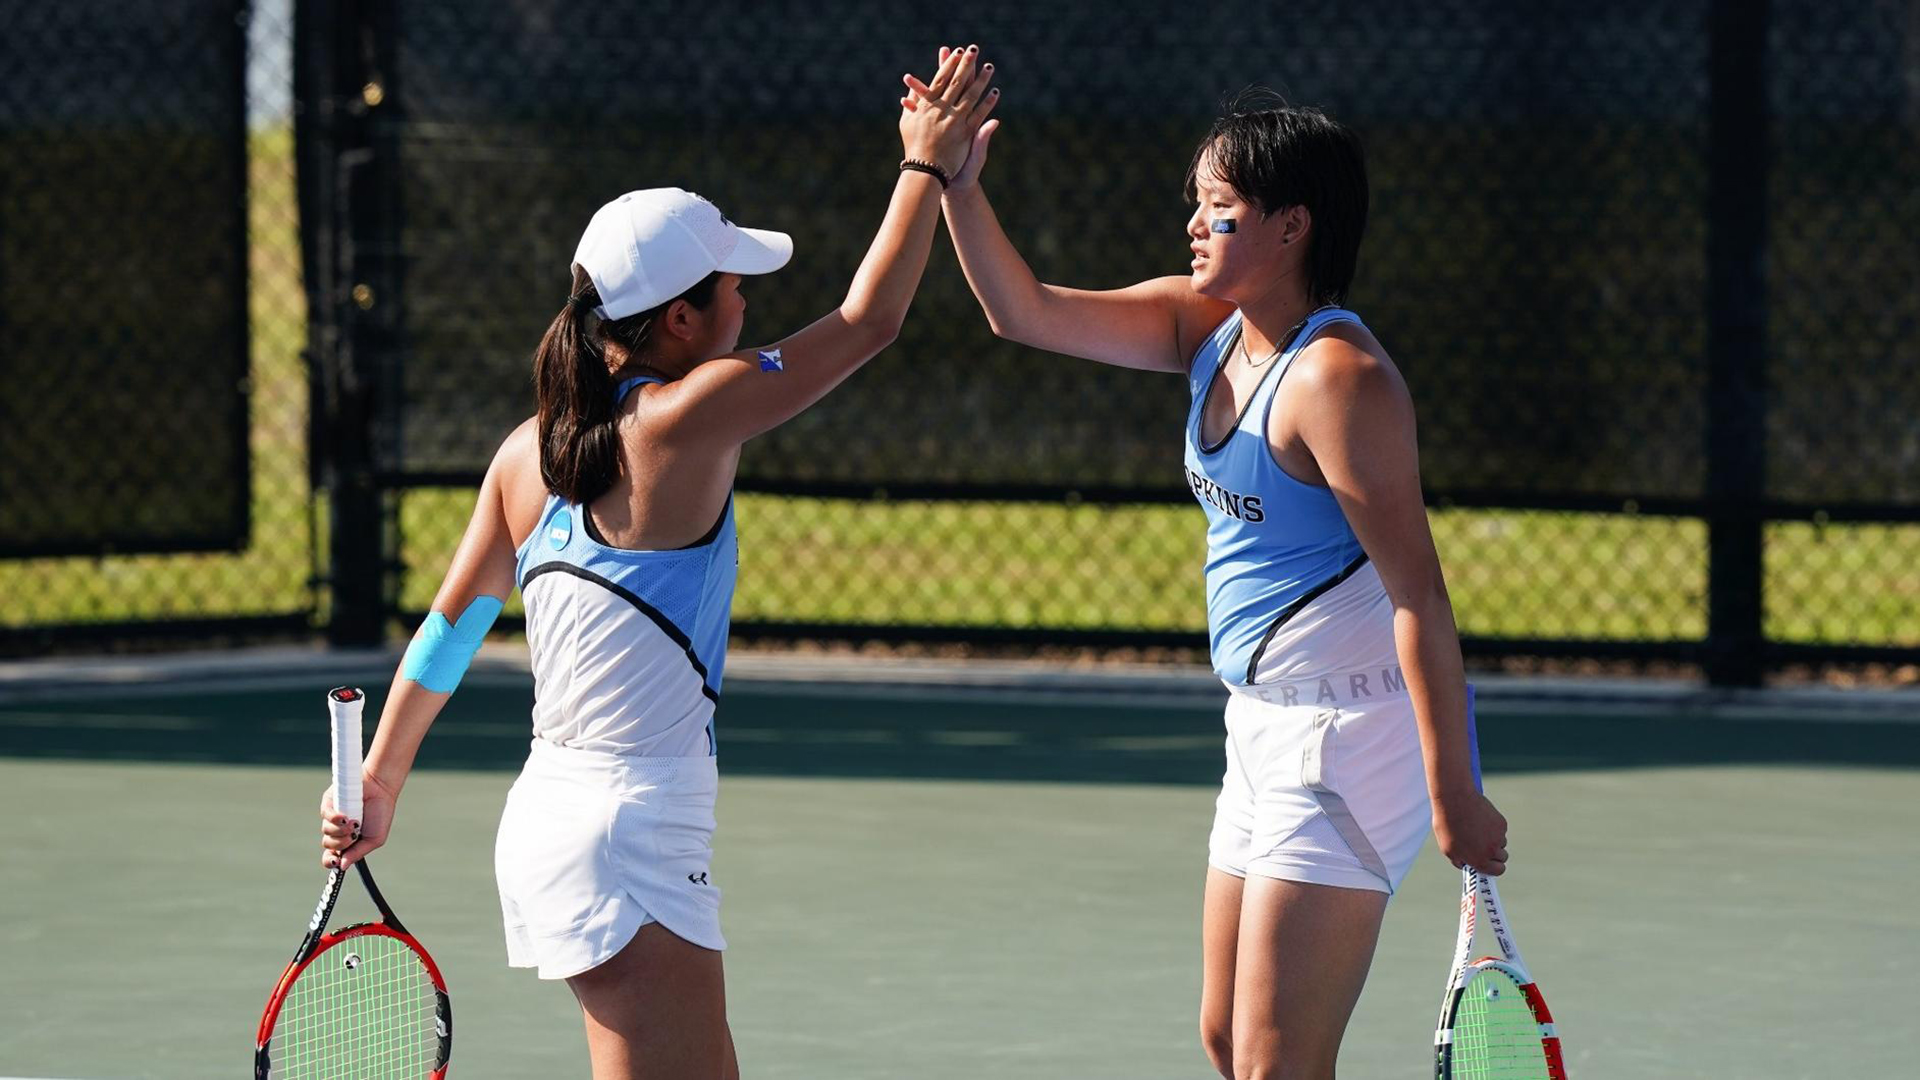 JHU's Wong & Xiao Advance to Doubles Quarterfinals; Swarthmore's Williams Earns Singles All-America